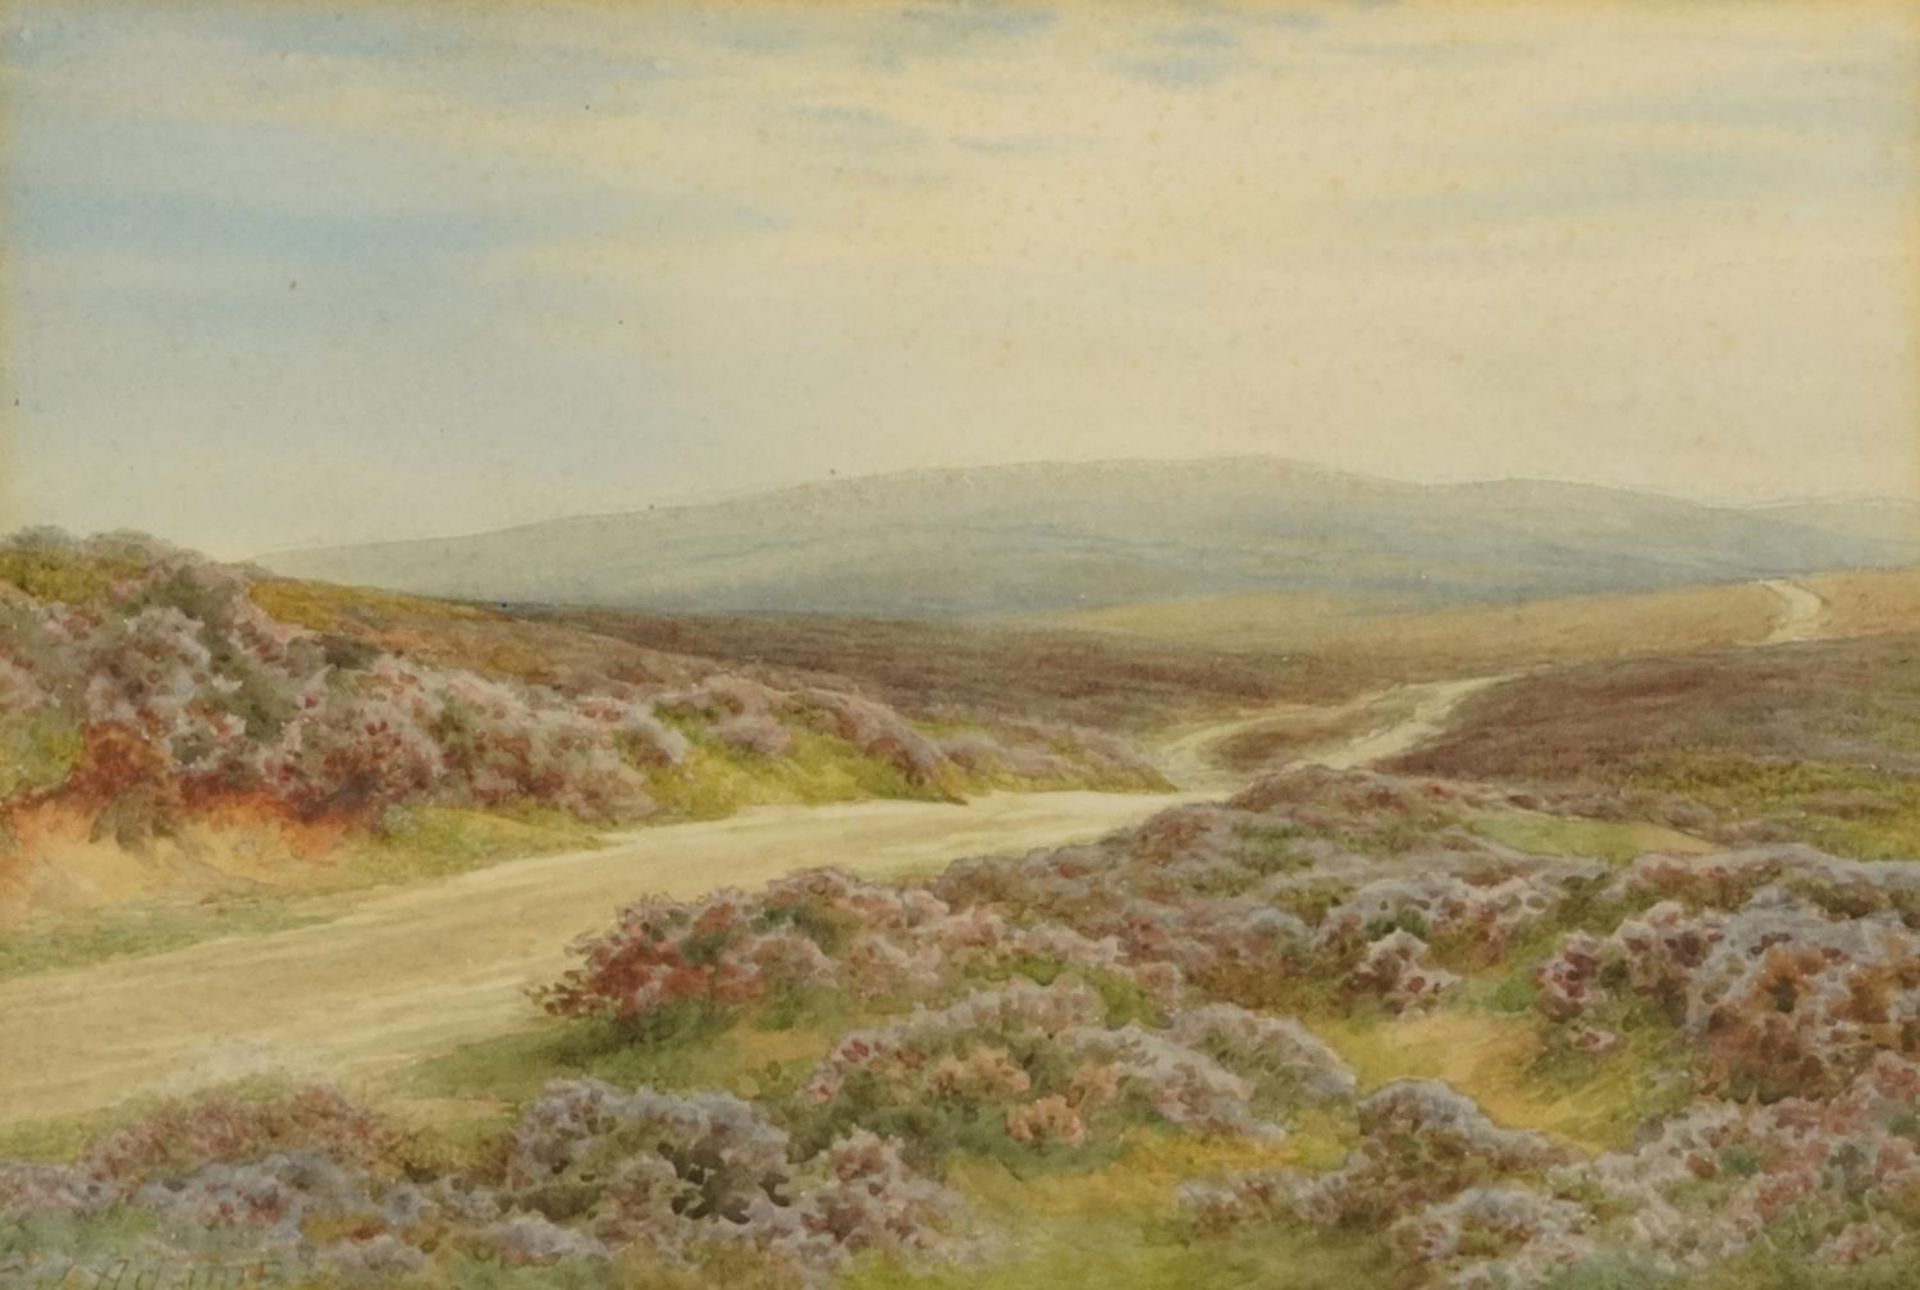 Charles James Adams - Rural landscape with path and heather, late 19th/early 20th century